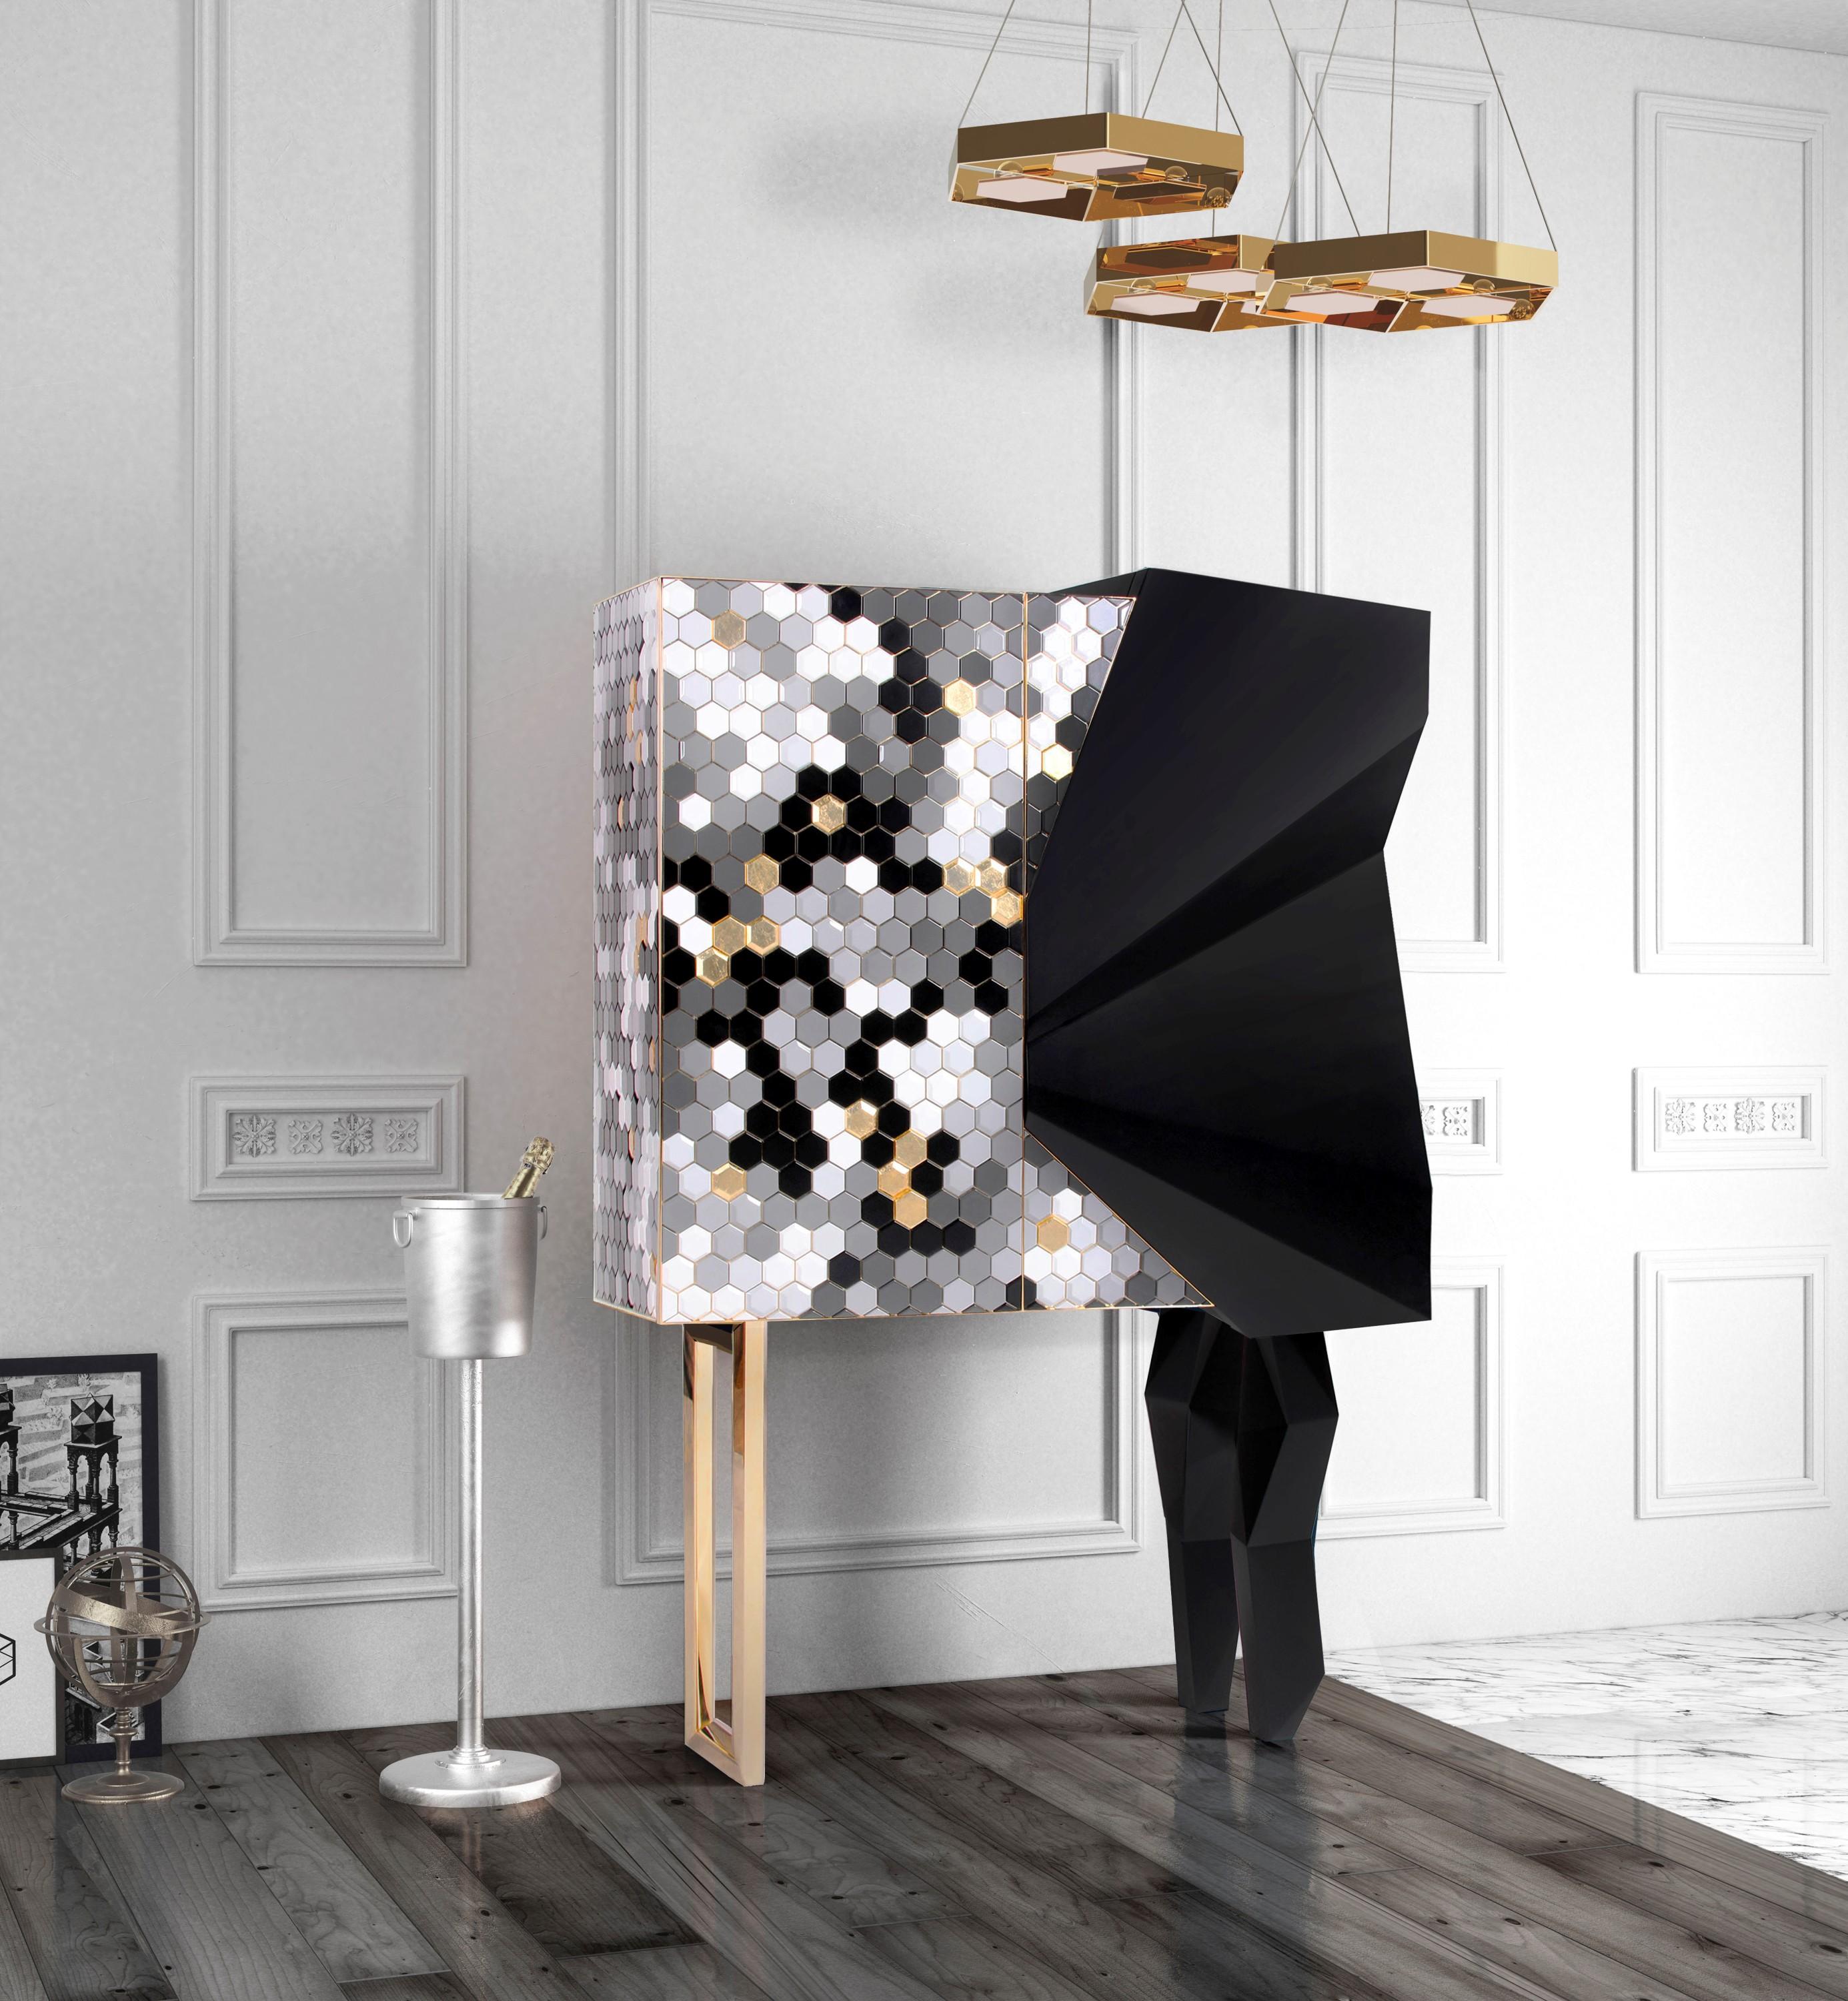 Honeycomb black and gold leaf cabinet, Royal Stranger
Dimensions: 185 x 126 x 60 cm
Materials: Black Pearl color combination with gold leaf and stainless steel coated in brass.

Inspired by one of the most intrinsic forms of nature, this